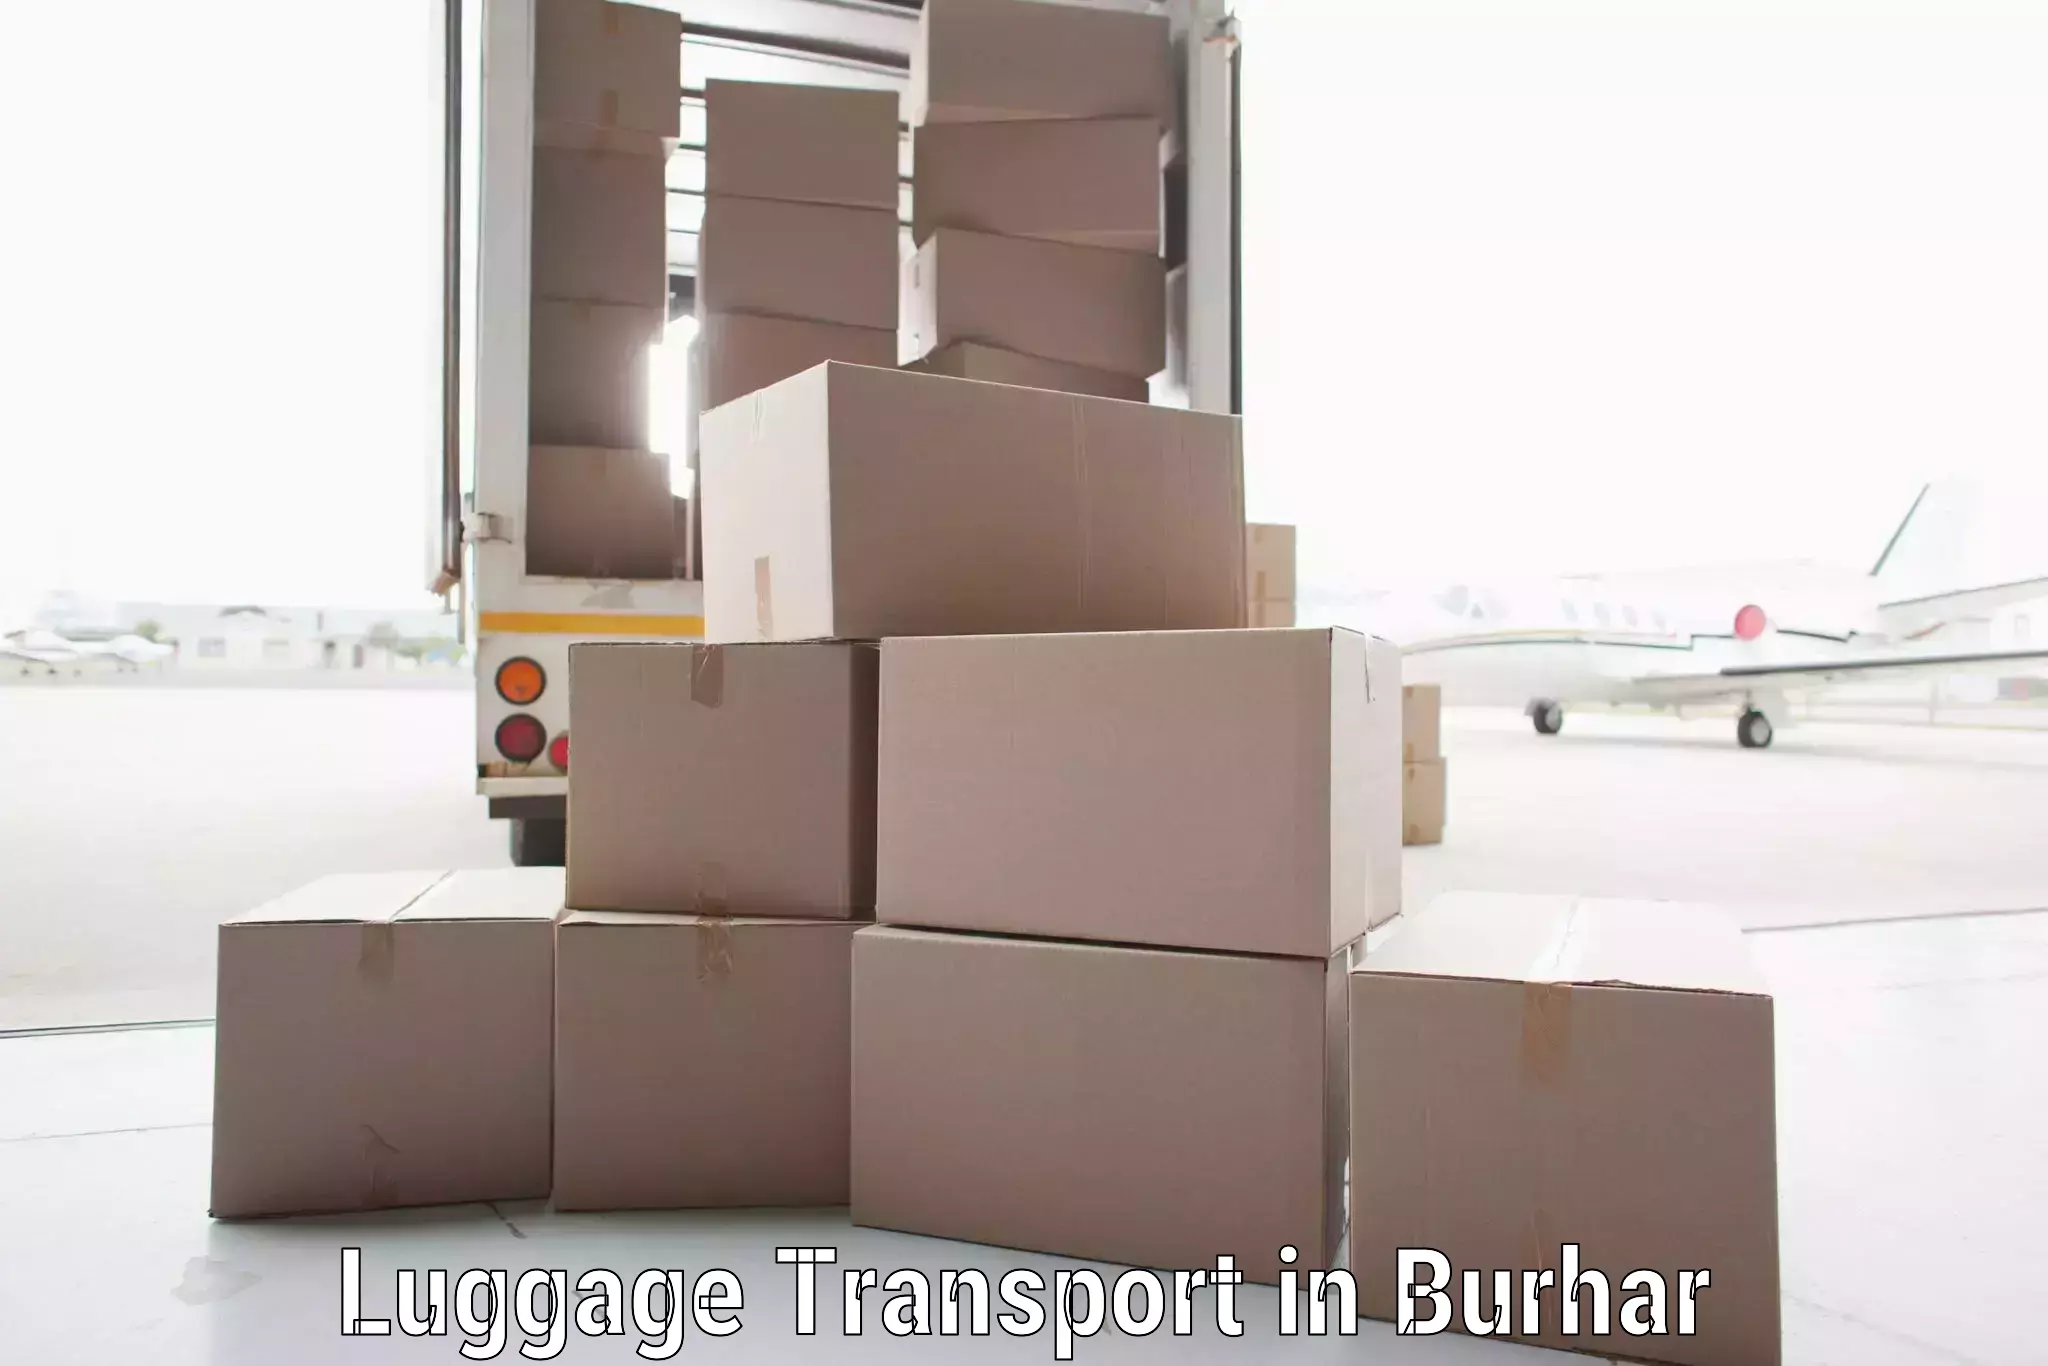 Business luggage transport in Burhar